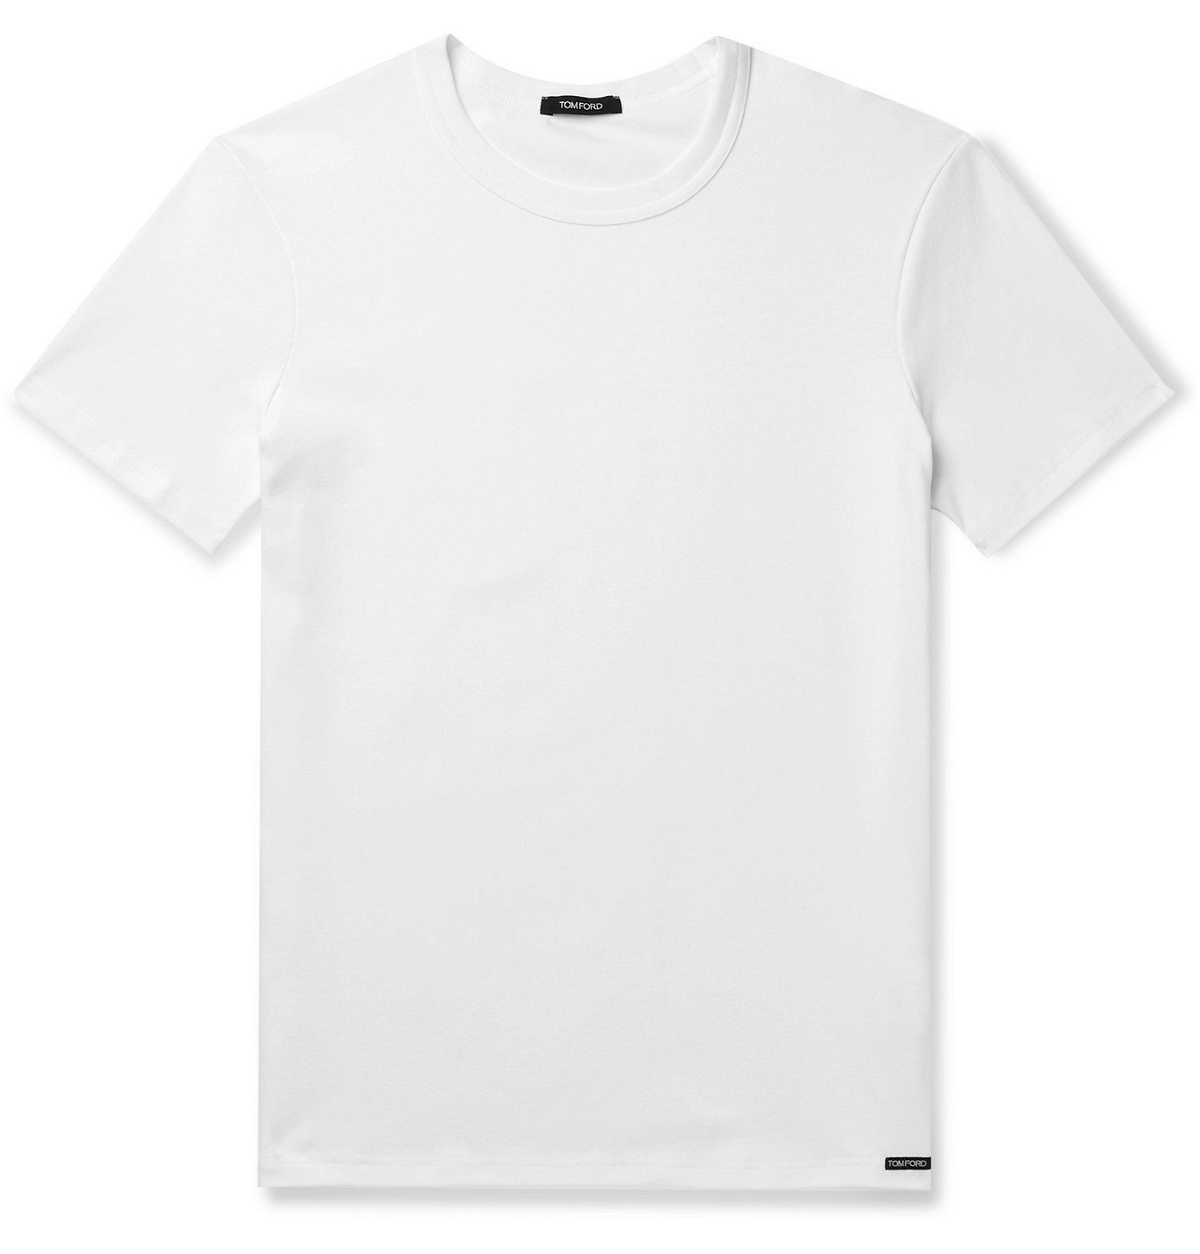 TOM FORD - Slim-Fit Stretch-Cotton Jersey T-Shirt - White TOM FORD